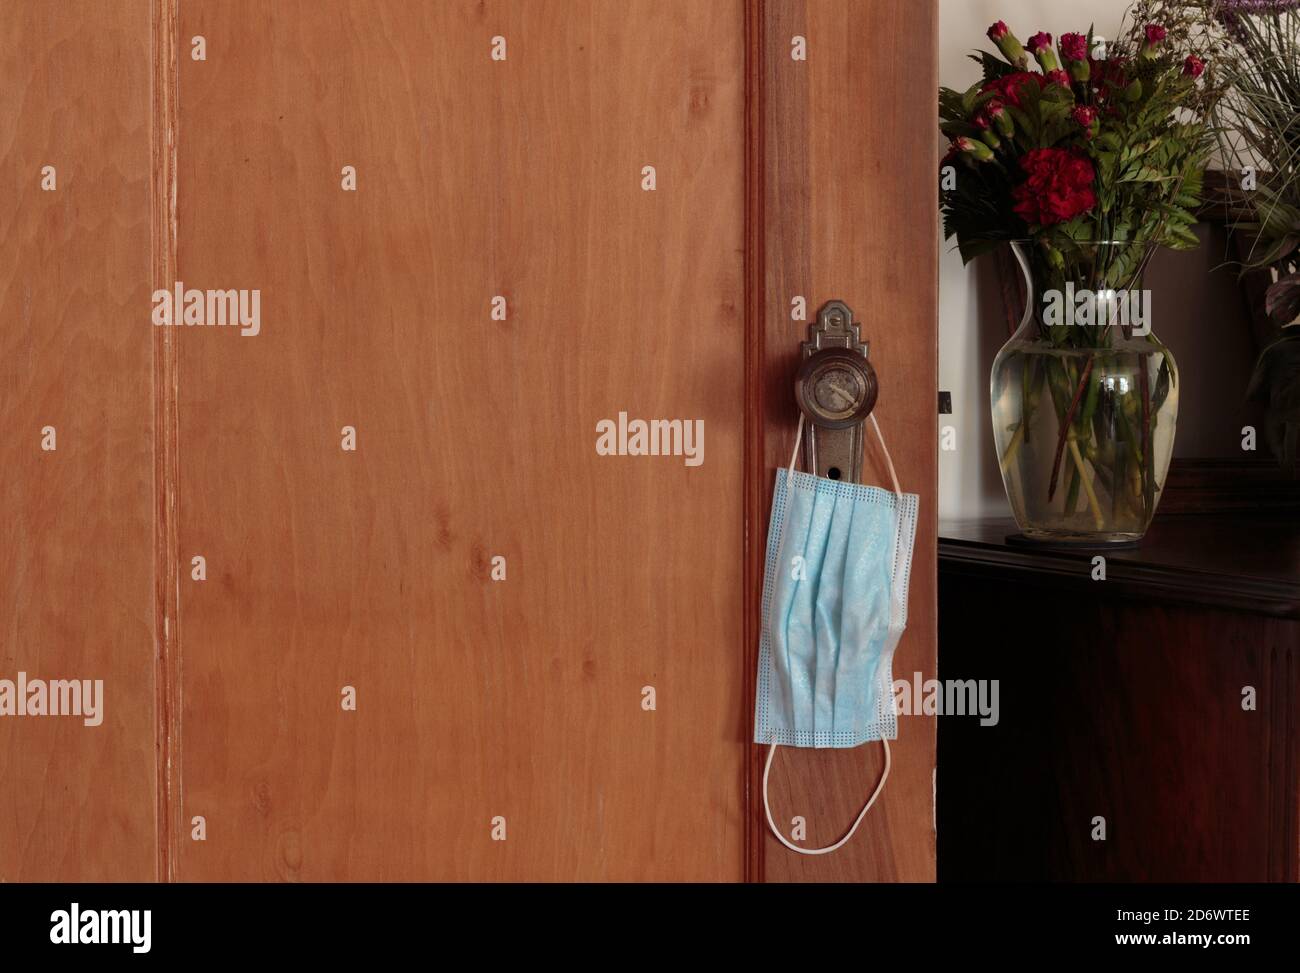 blue face mask hanging from the knob of a wooden door next to a table with red flowers in a vase, theme about face masks becoming a part of daily life Stock Photo